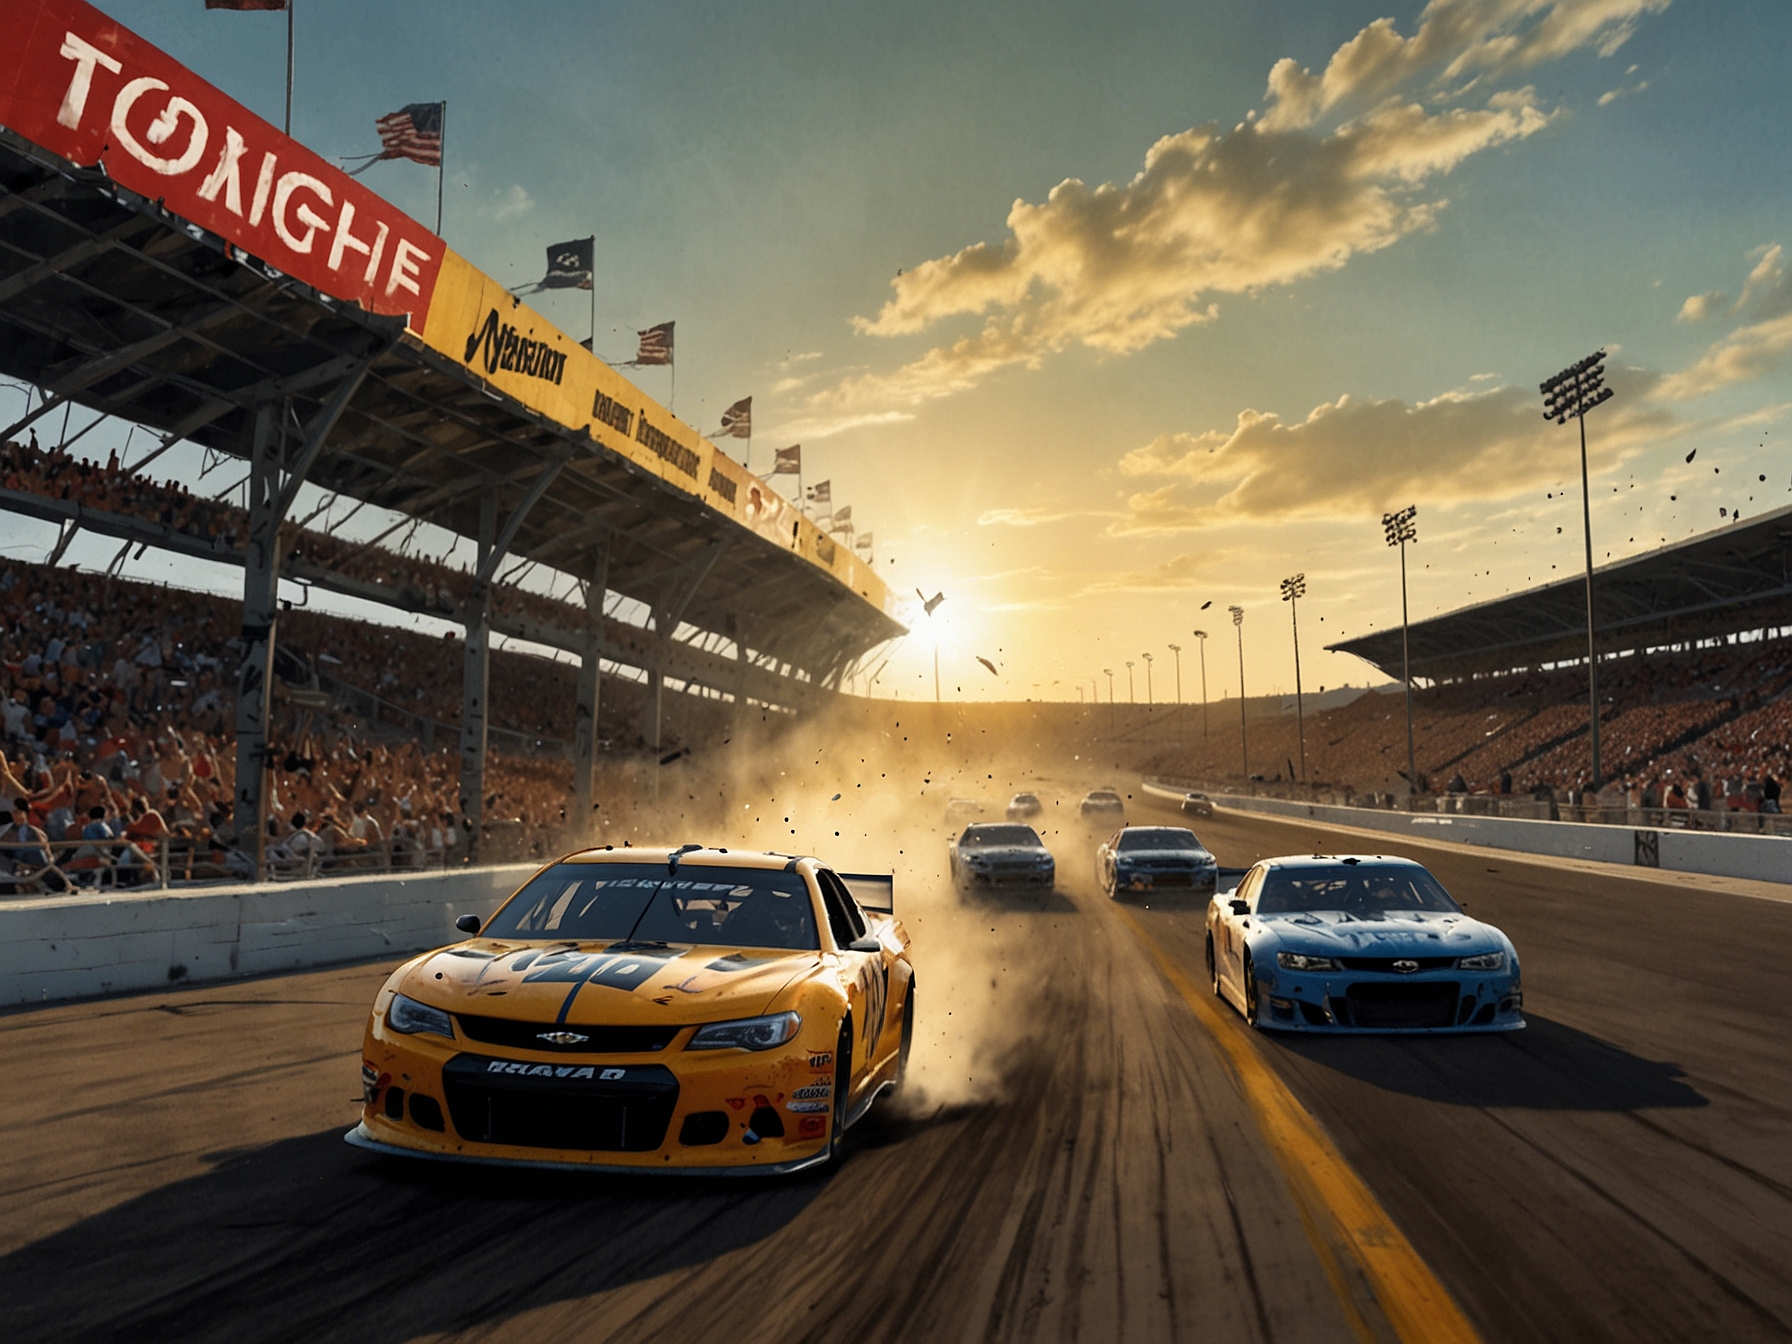 A thrilling NASCAR race at Iowa Speedway, showcasing cars battling in close quarters on the 0.875-mile track with vibrant fans in the stands creating an electrifying atmosphere.